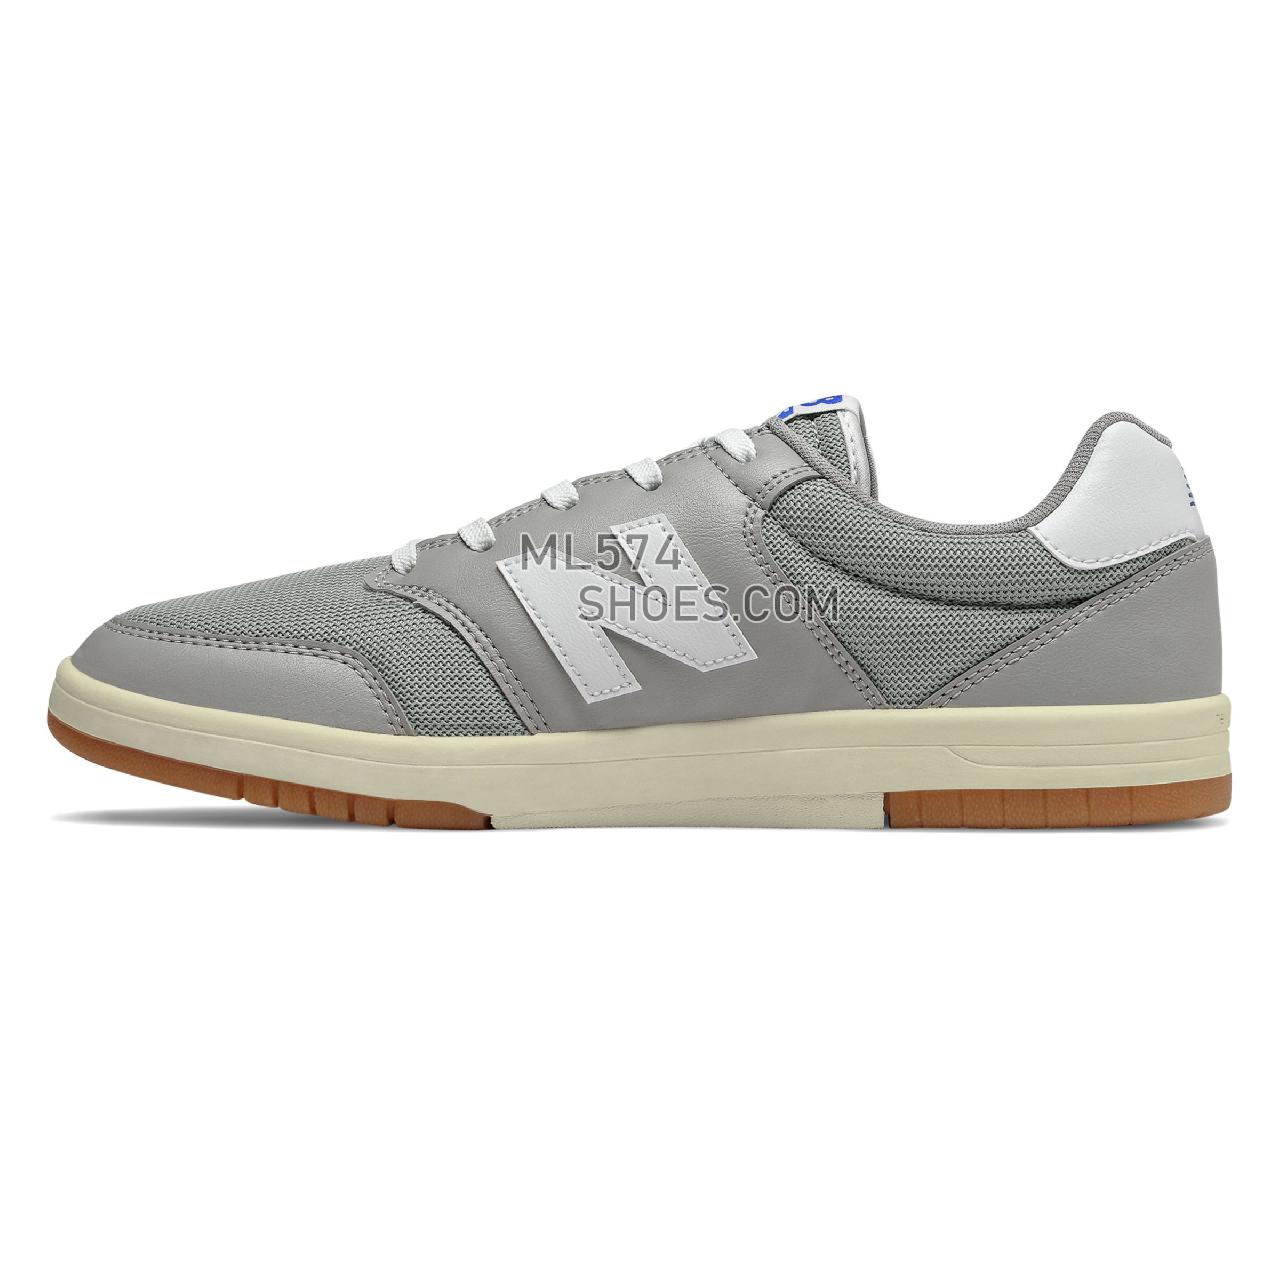 New Balance All Coasts 425 - Men's Court Classics - Grey with White - AM425LGY